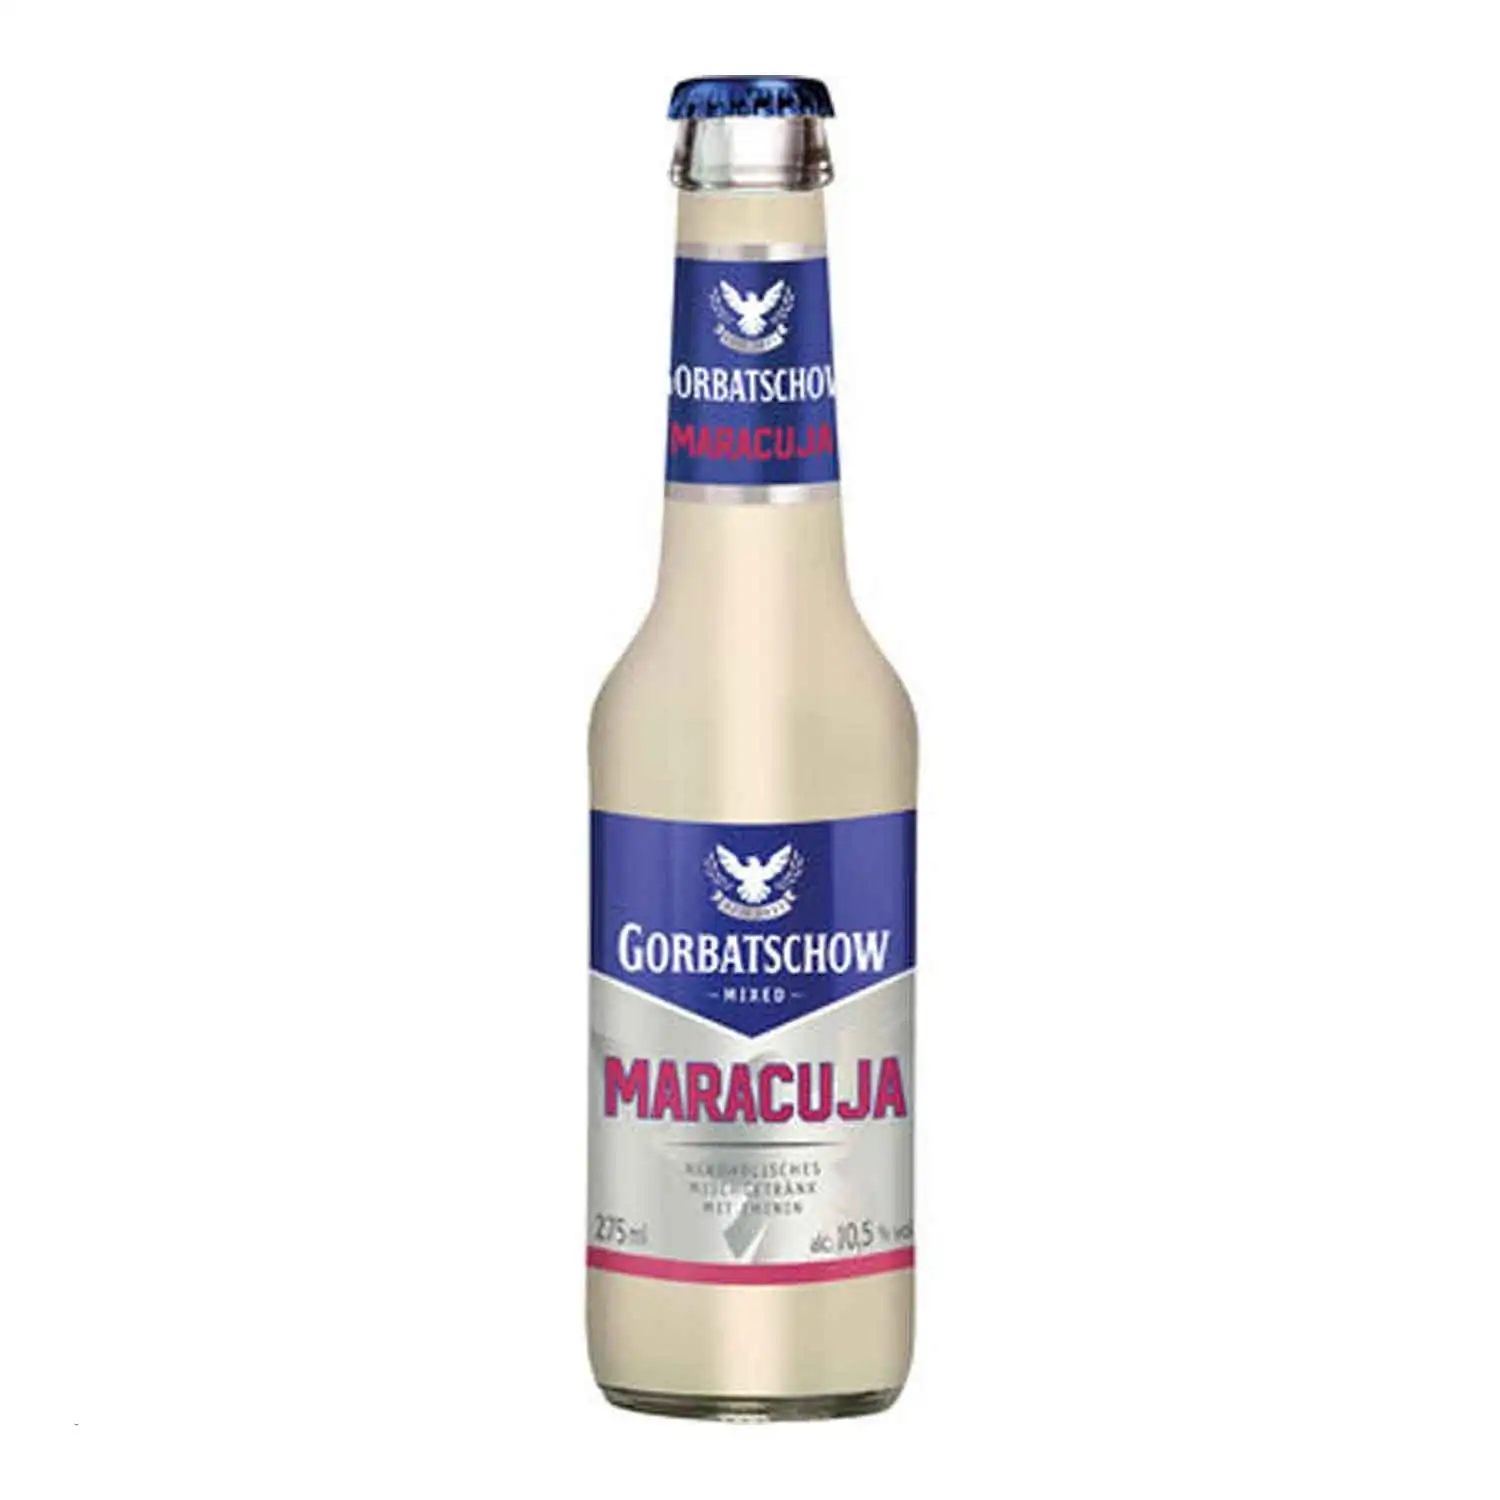 Gorbatschow maracuja 27,5cl Alc 10,5% - Buy at Real Tobacco